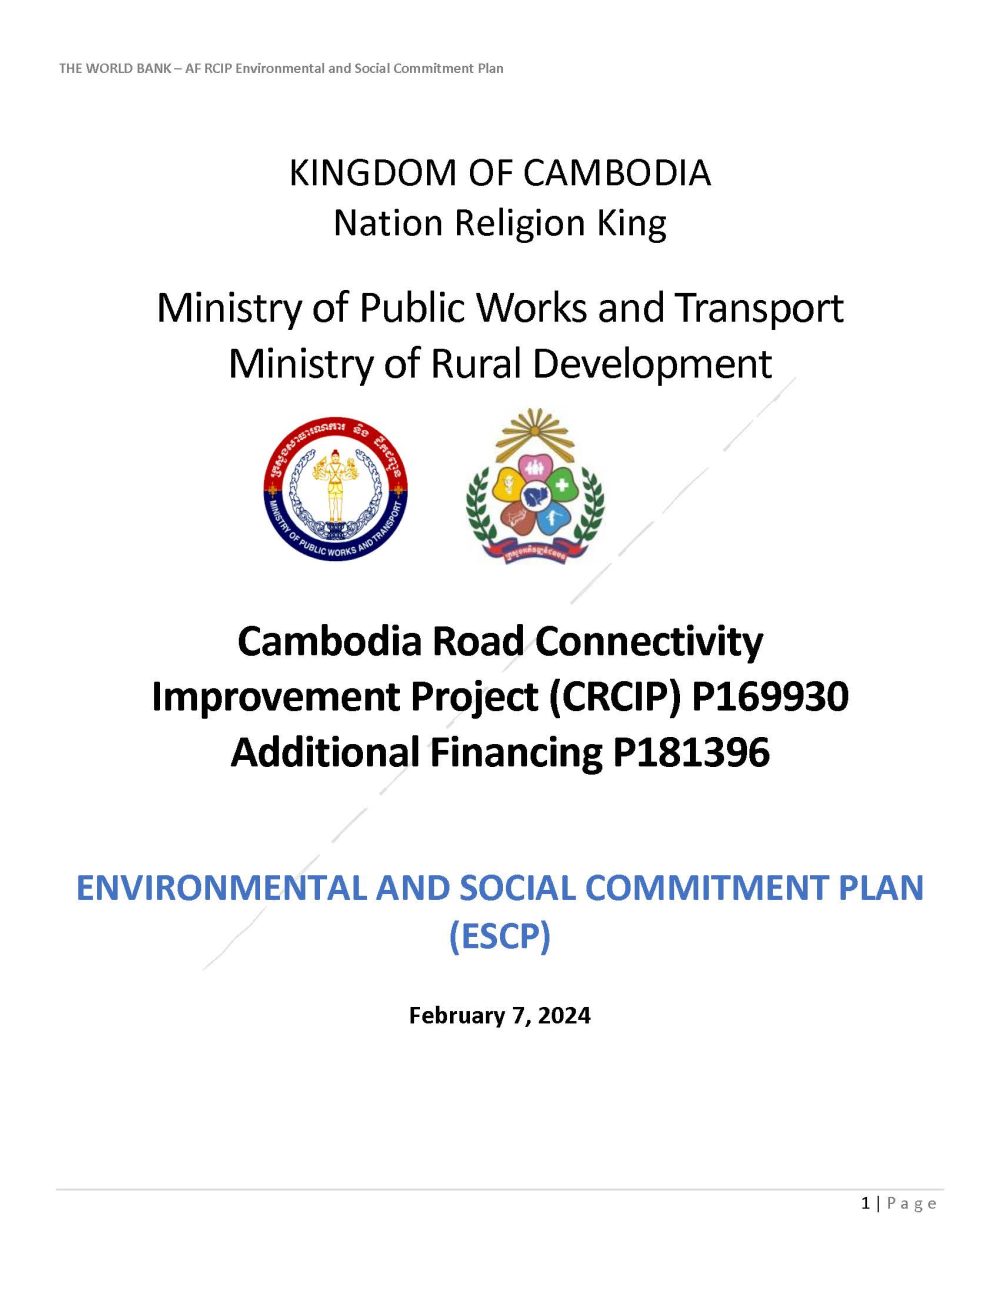 Pages from Updated Environmental and Social Commitment Plan